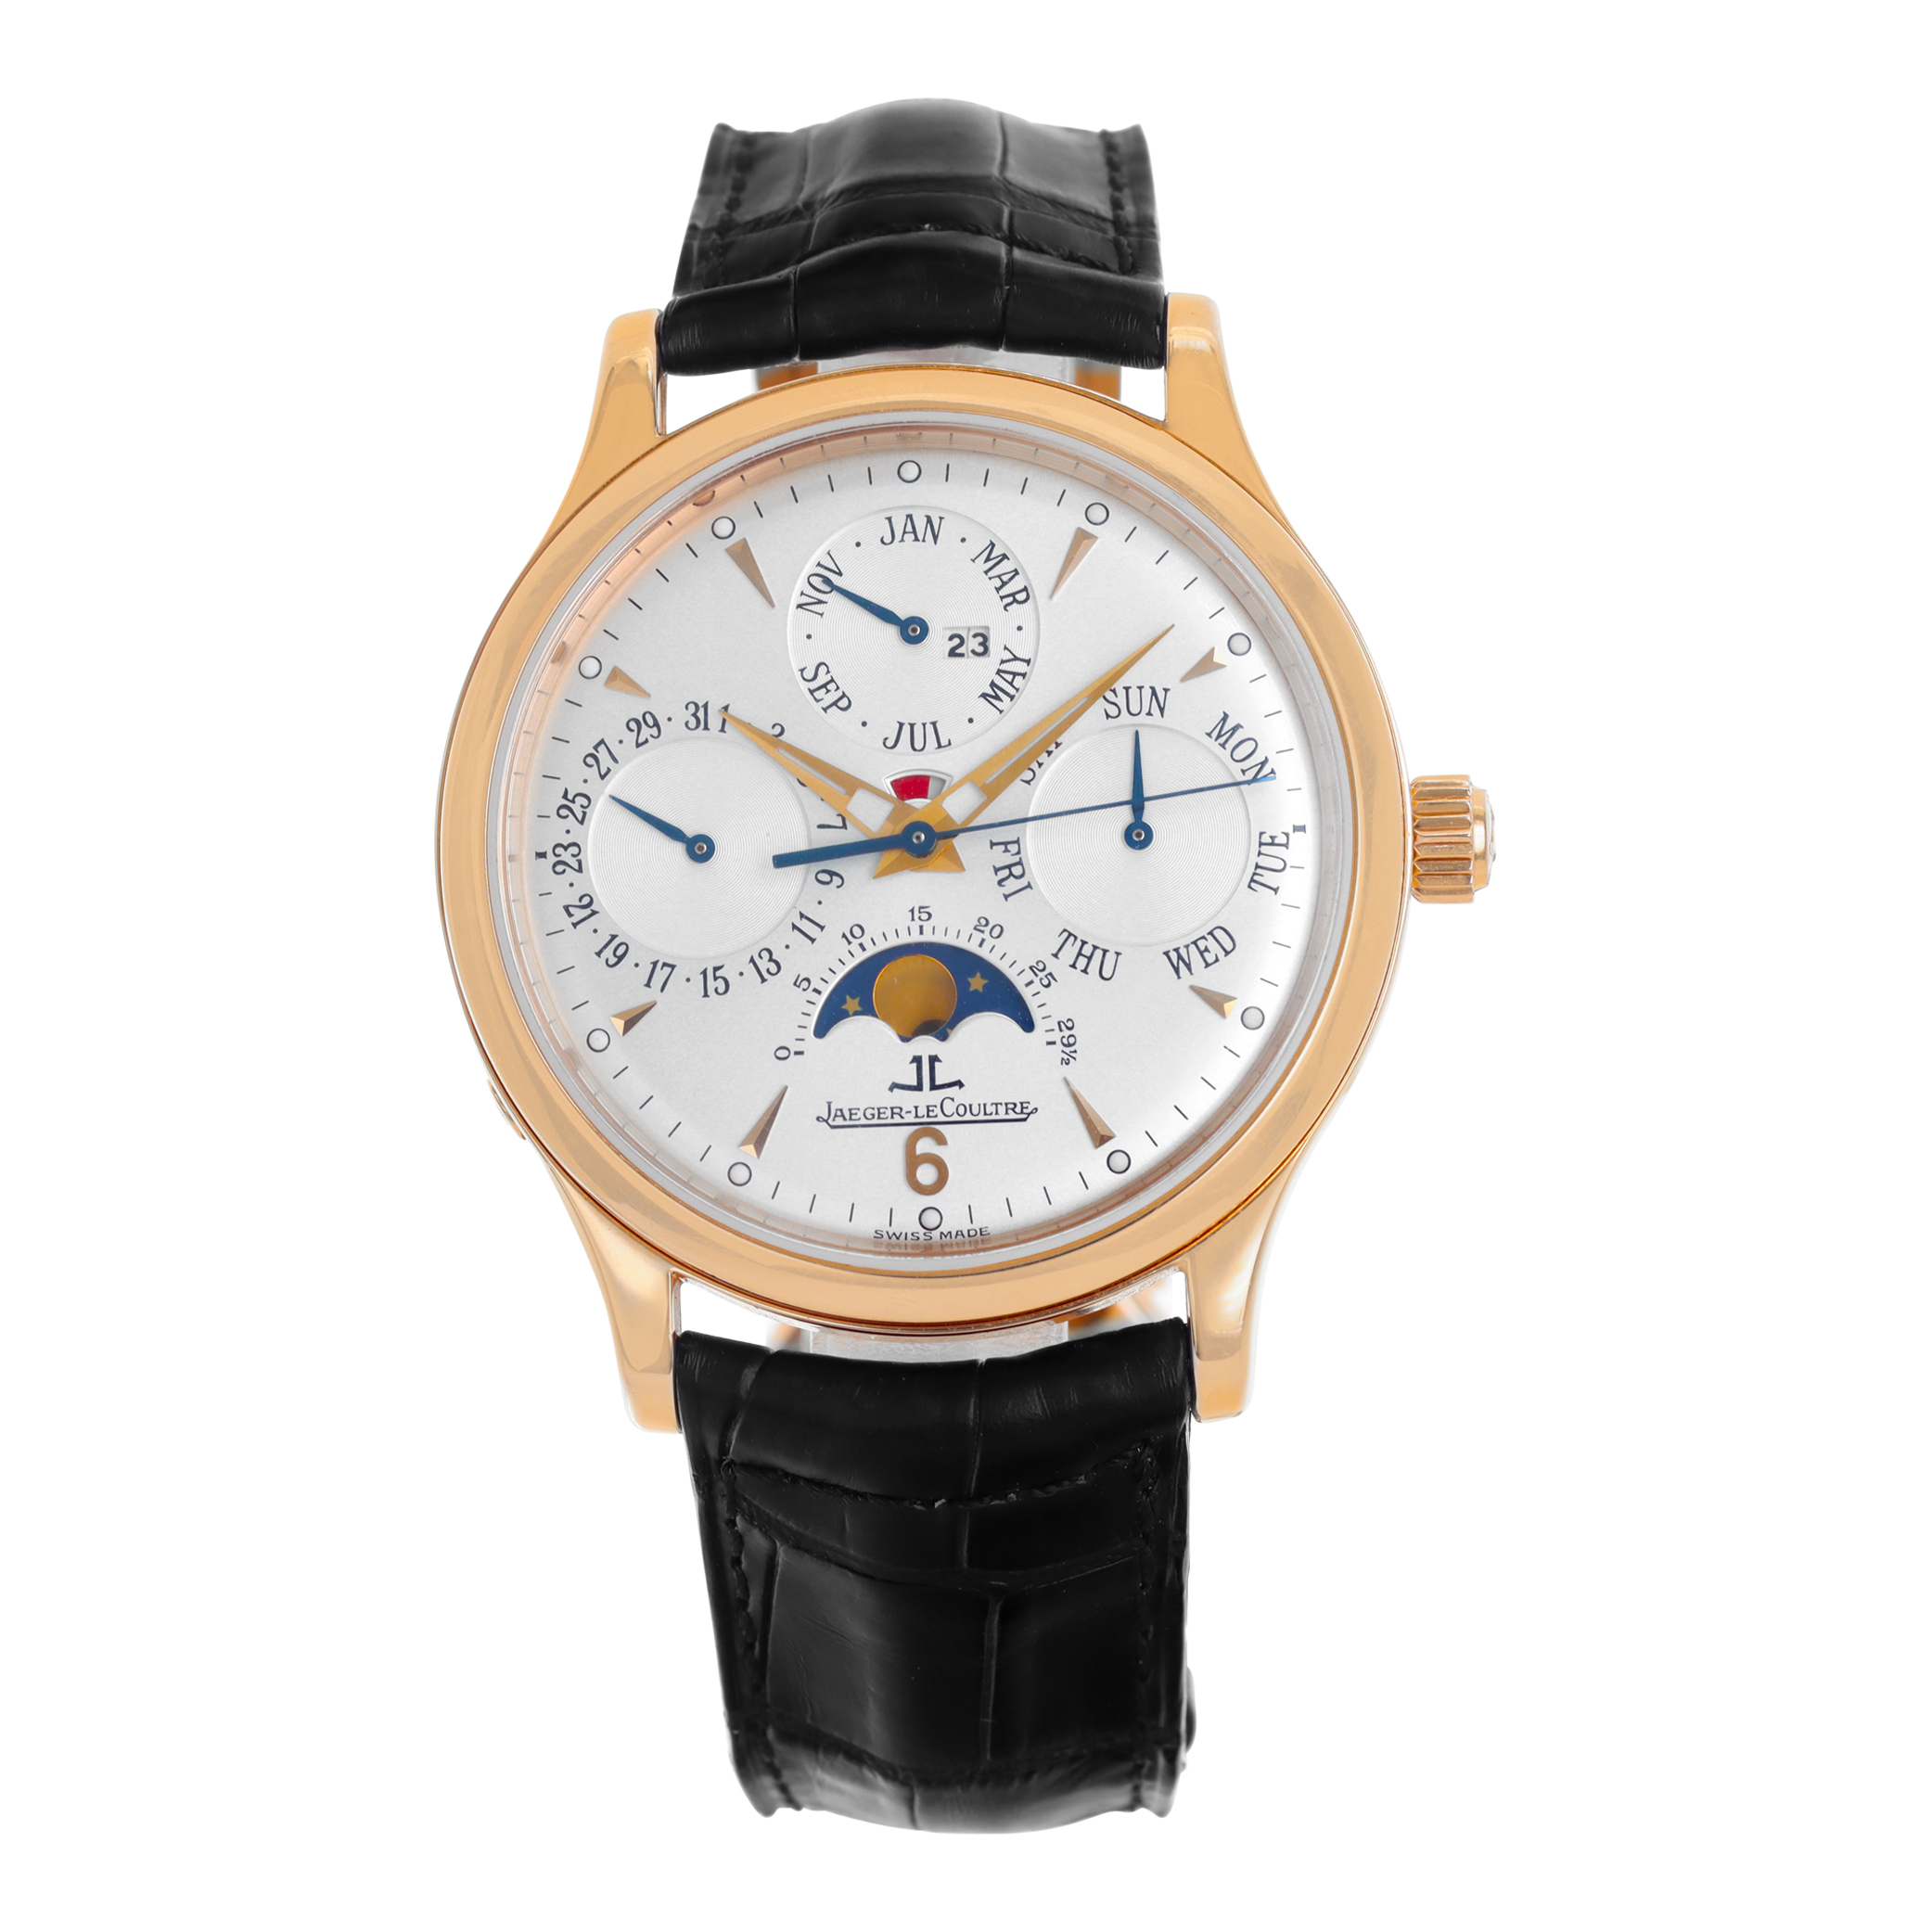 Jaeger LeCoultre Master Perpetual 37mm 140.2.80 / Q149242a (Watches)